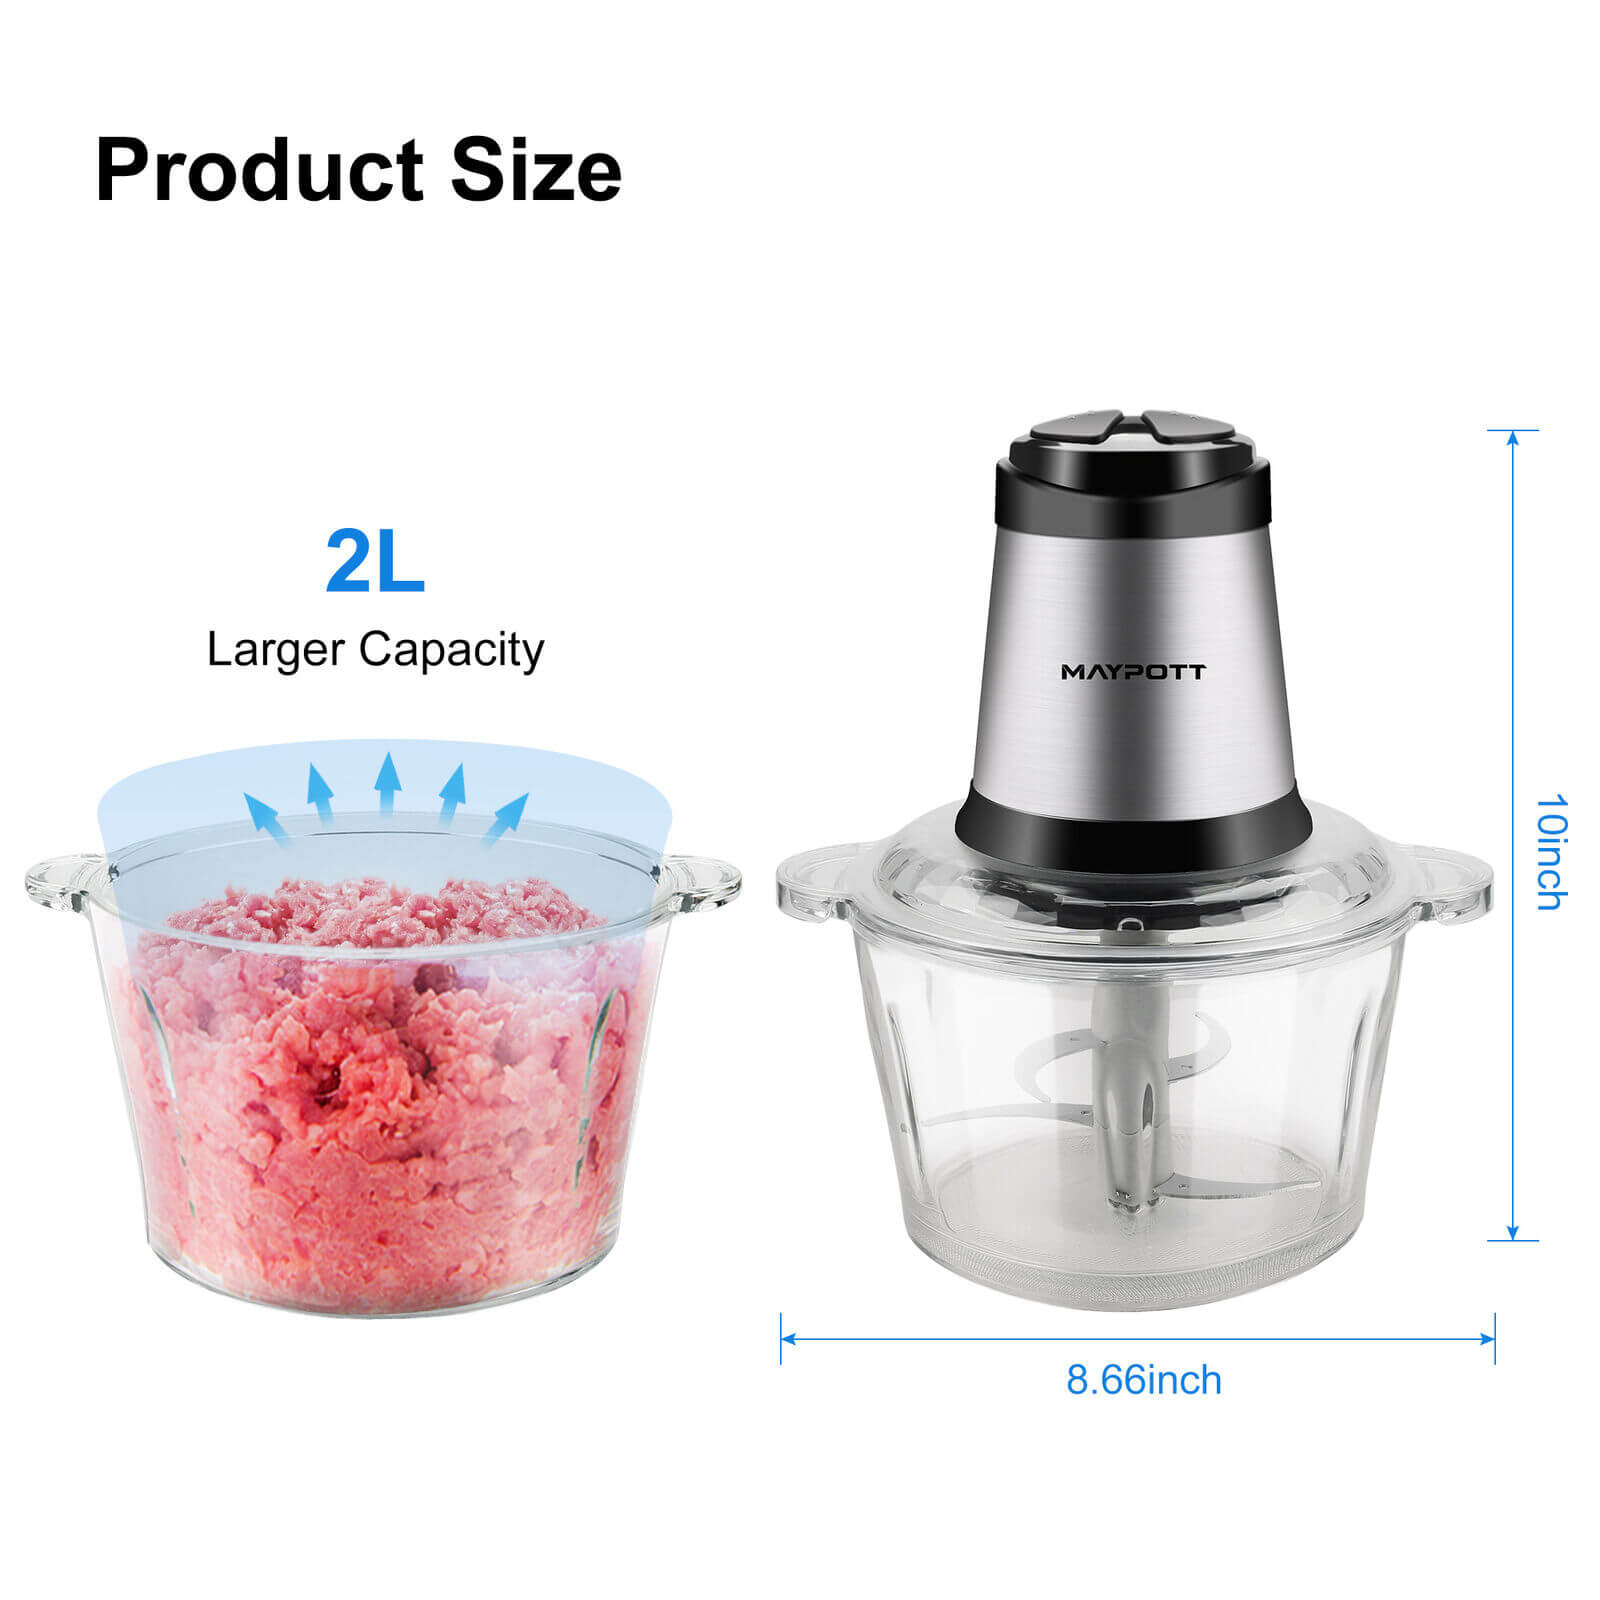 6 in 1 Meat Grinder - 500W Multi-functional Stand Mixer